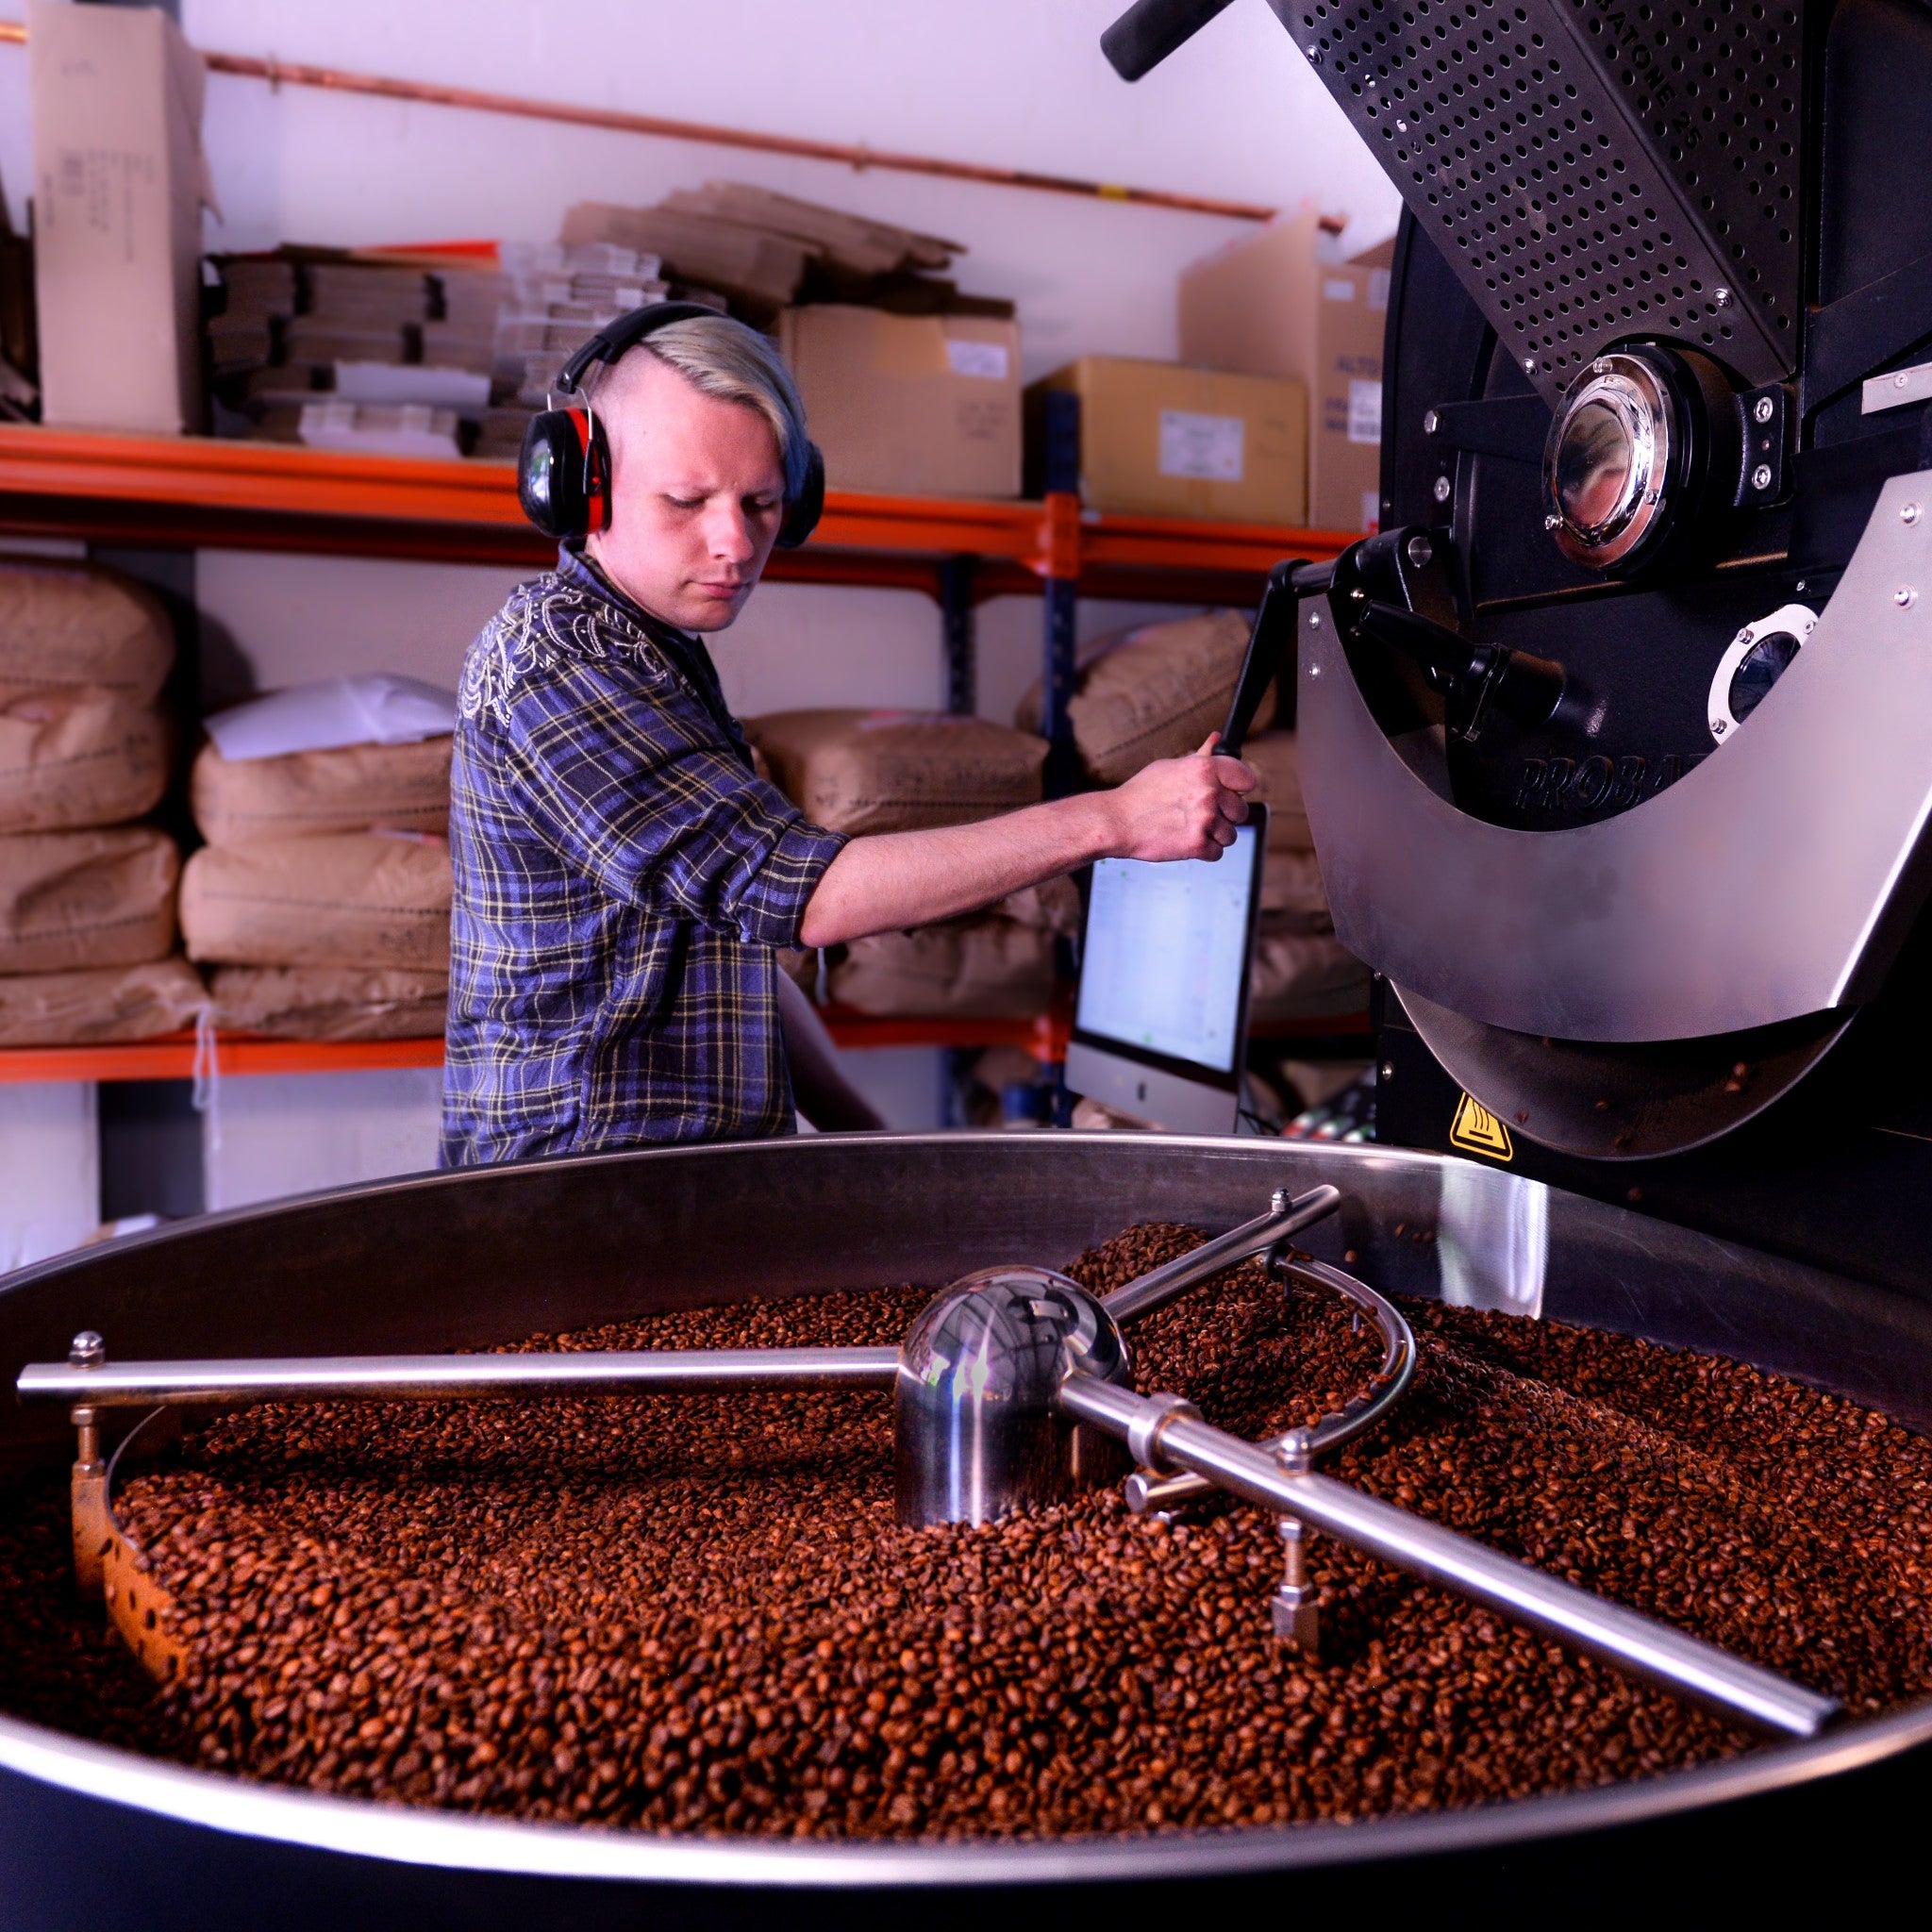 Medium shot of a person wearing ear protectors standing at a Probat speciality coffee roaster with freshly roasted coffee in the cooling tray